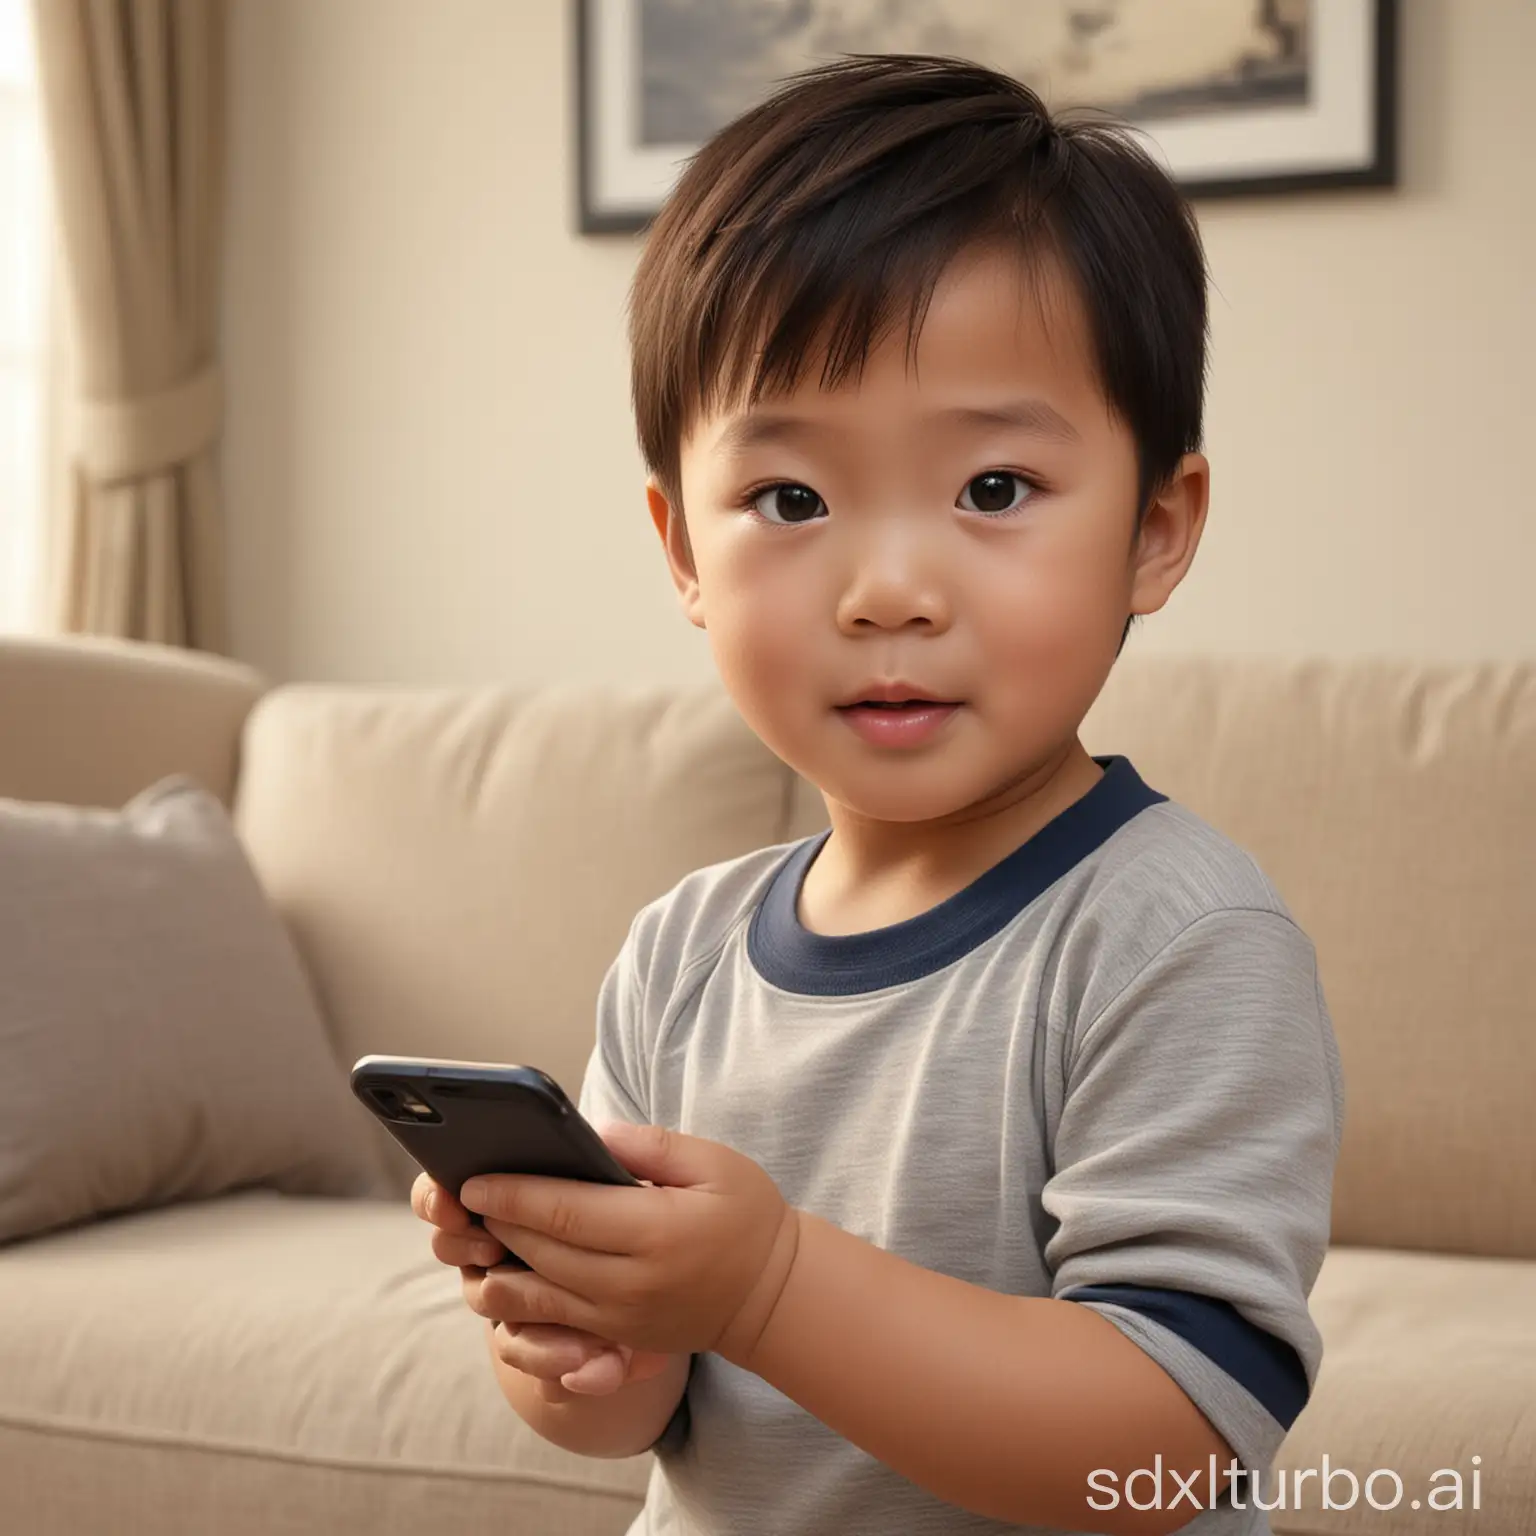 Here's the image of a handsome five-year-old Chinese boy, depicted in a realistic living room setting as he eagerly reaches for a smartphone.